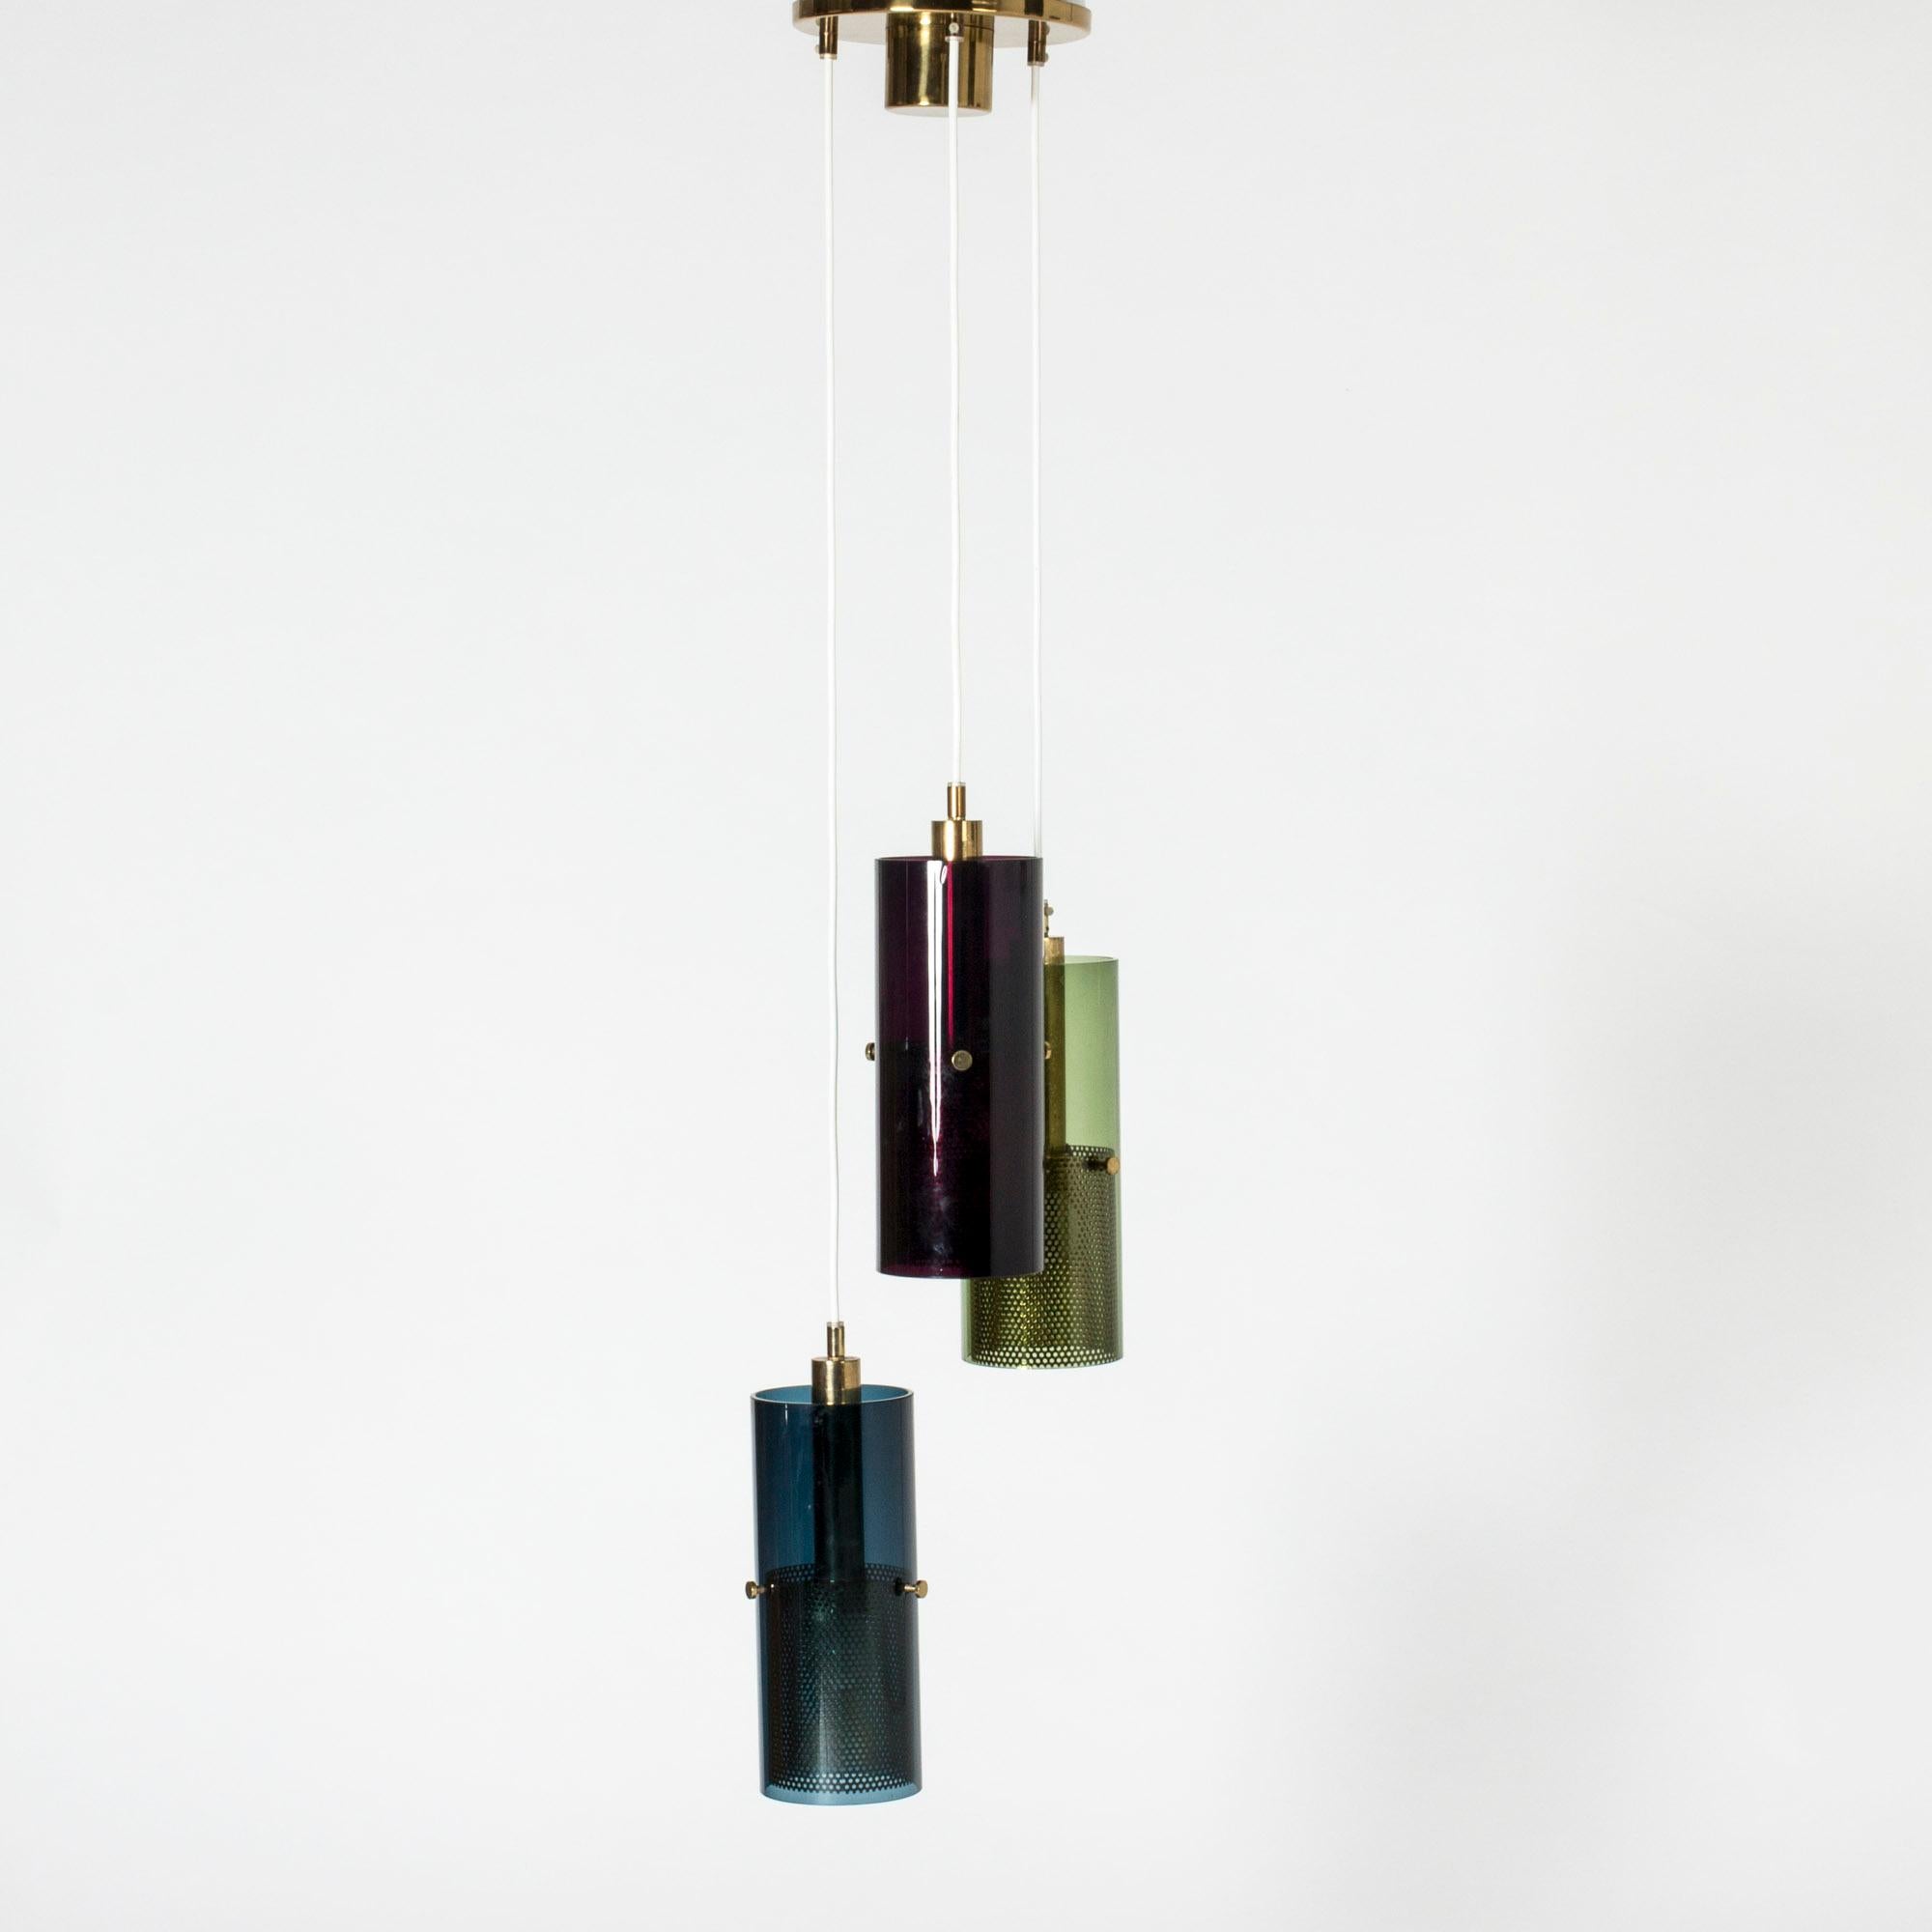 Striking ceiling lamp by Hans-Agne Jakobsson with three cylindrical glass shades suspended from a large brass ceiling cup. Perforated brass cylinders inside enclose the light sources and give a beautiful sheen through the red, blue and green